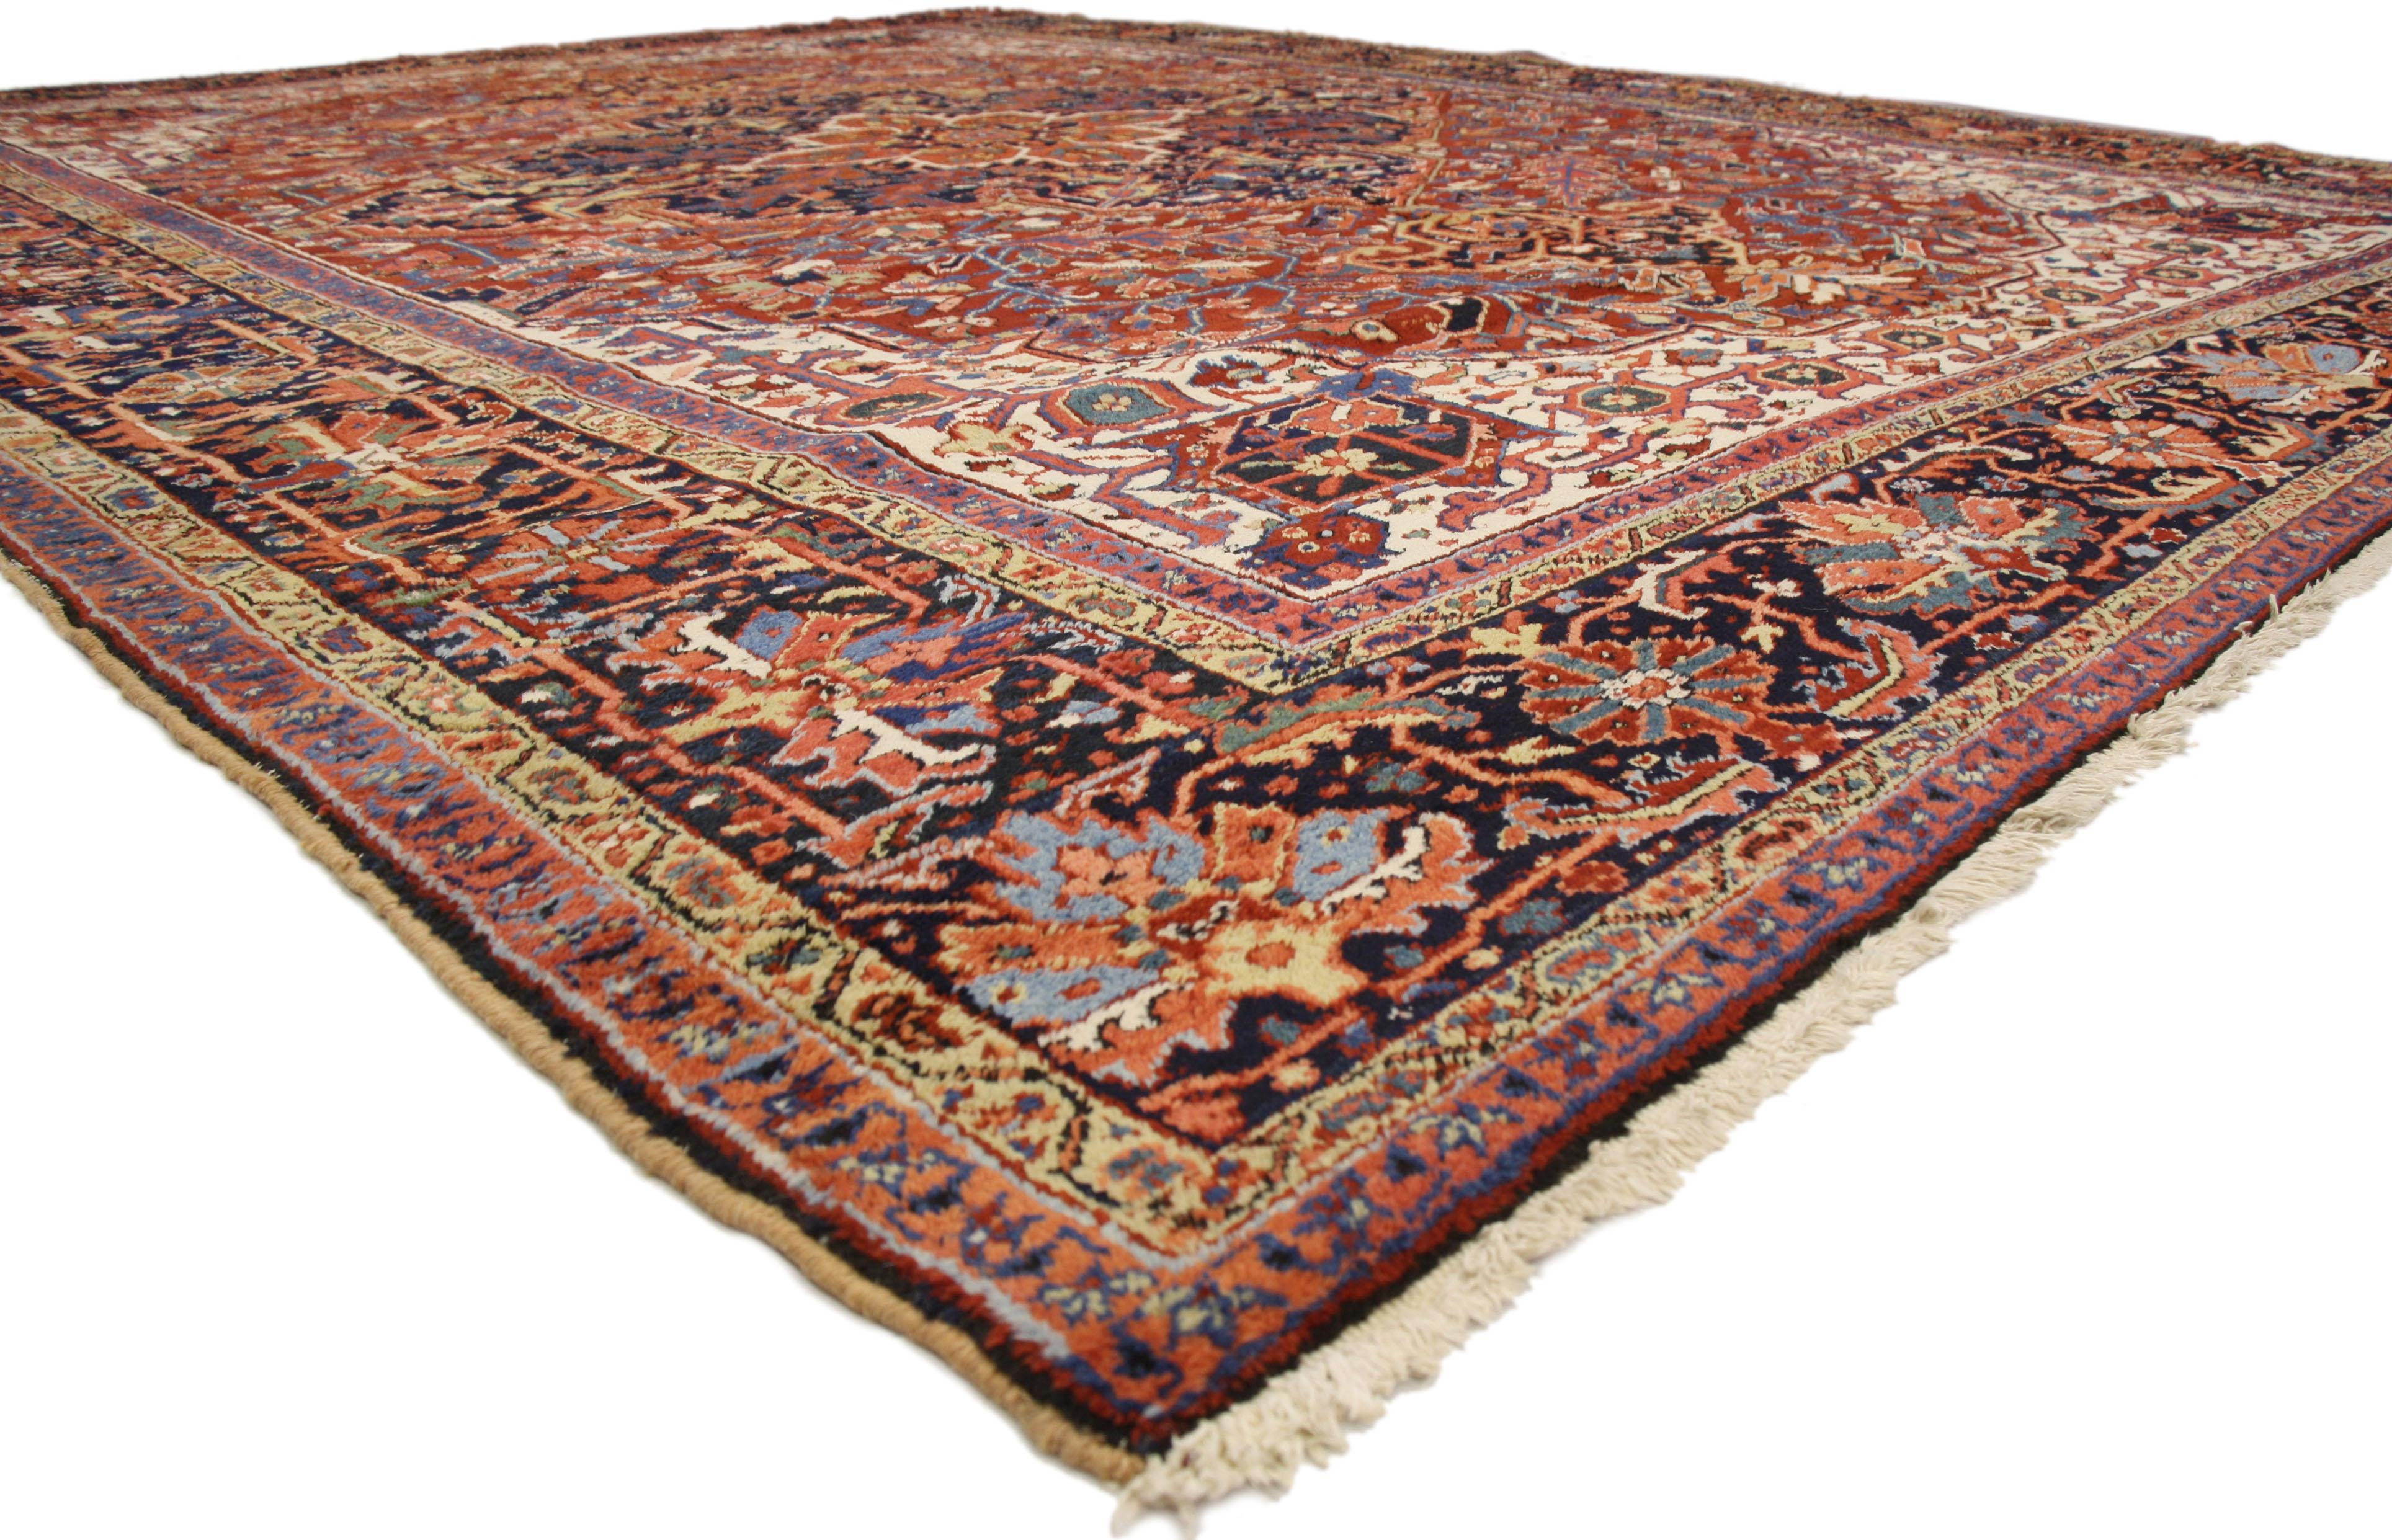 74680 Antique Persian Heriz Palace Rug with Federal and American Colonial Style. Traditional and regal with brilliant color, this antique Persian Heriz area rug with American Colonial and Federal style is comprised of a prominent octagram medallion